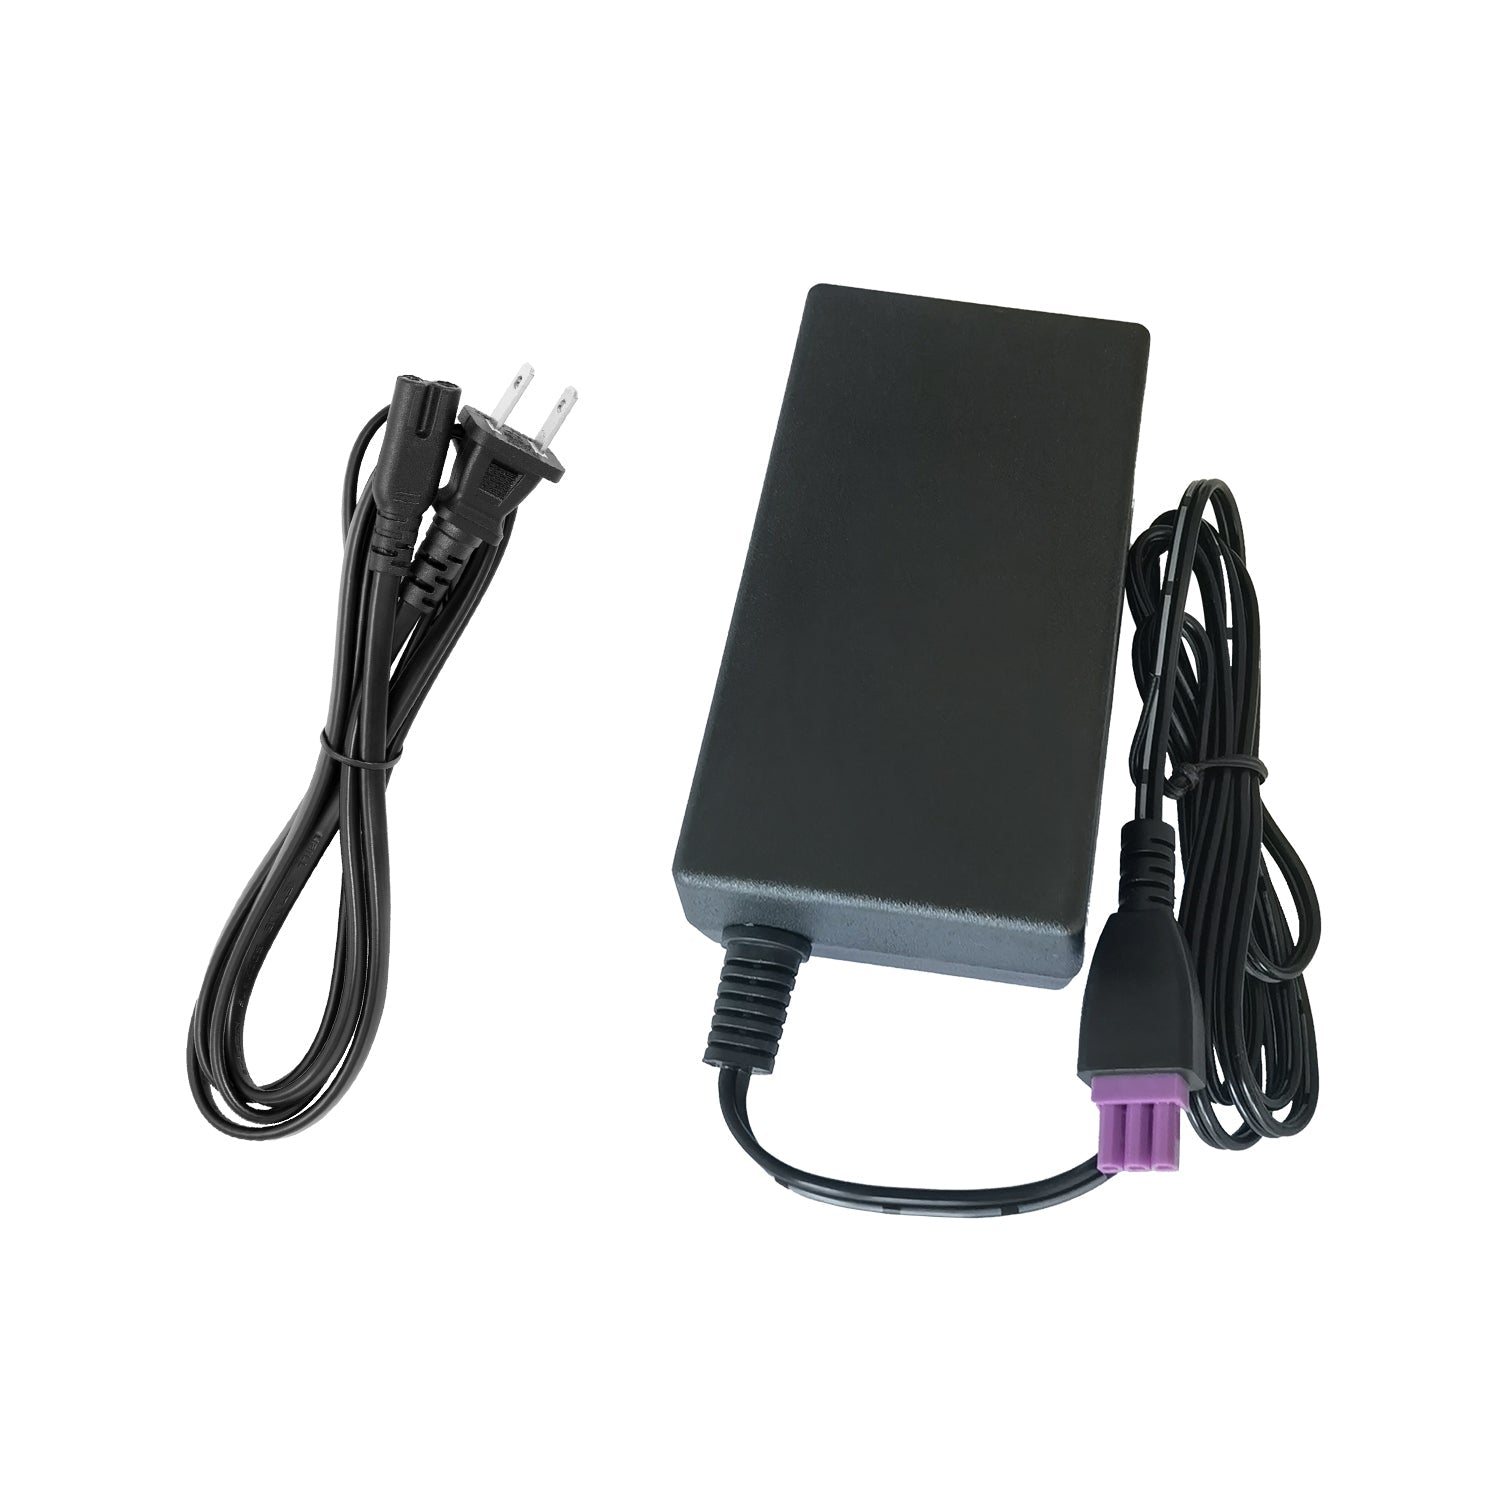 Power Adapter for HP Officejet 6500 All-in-One Printer.